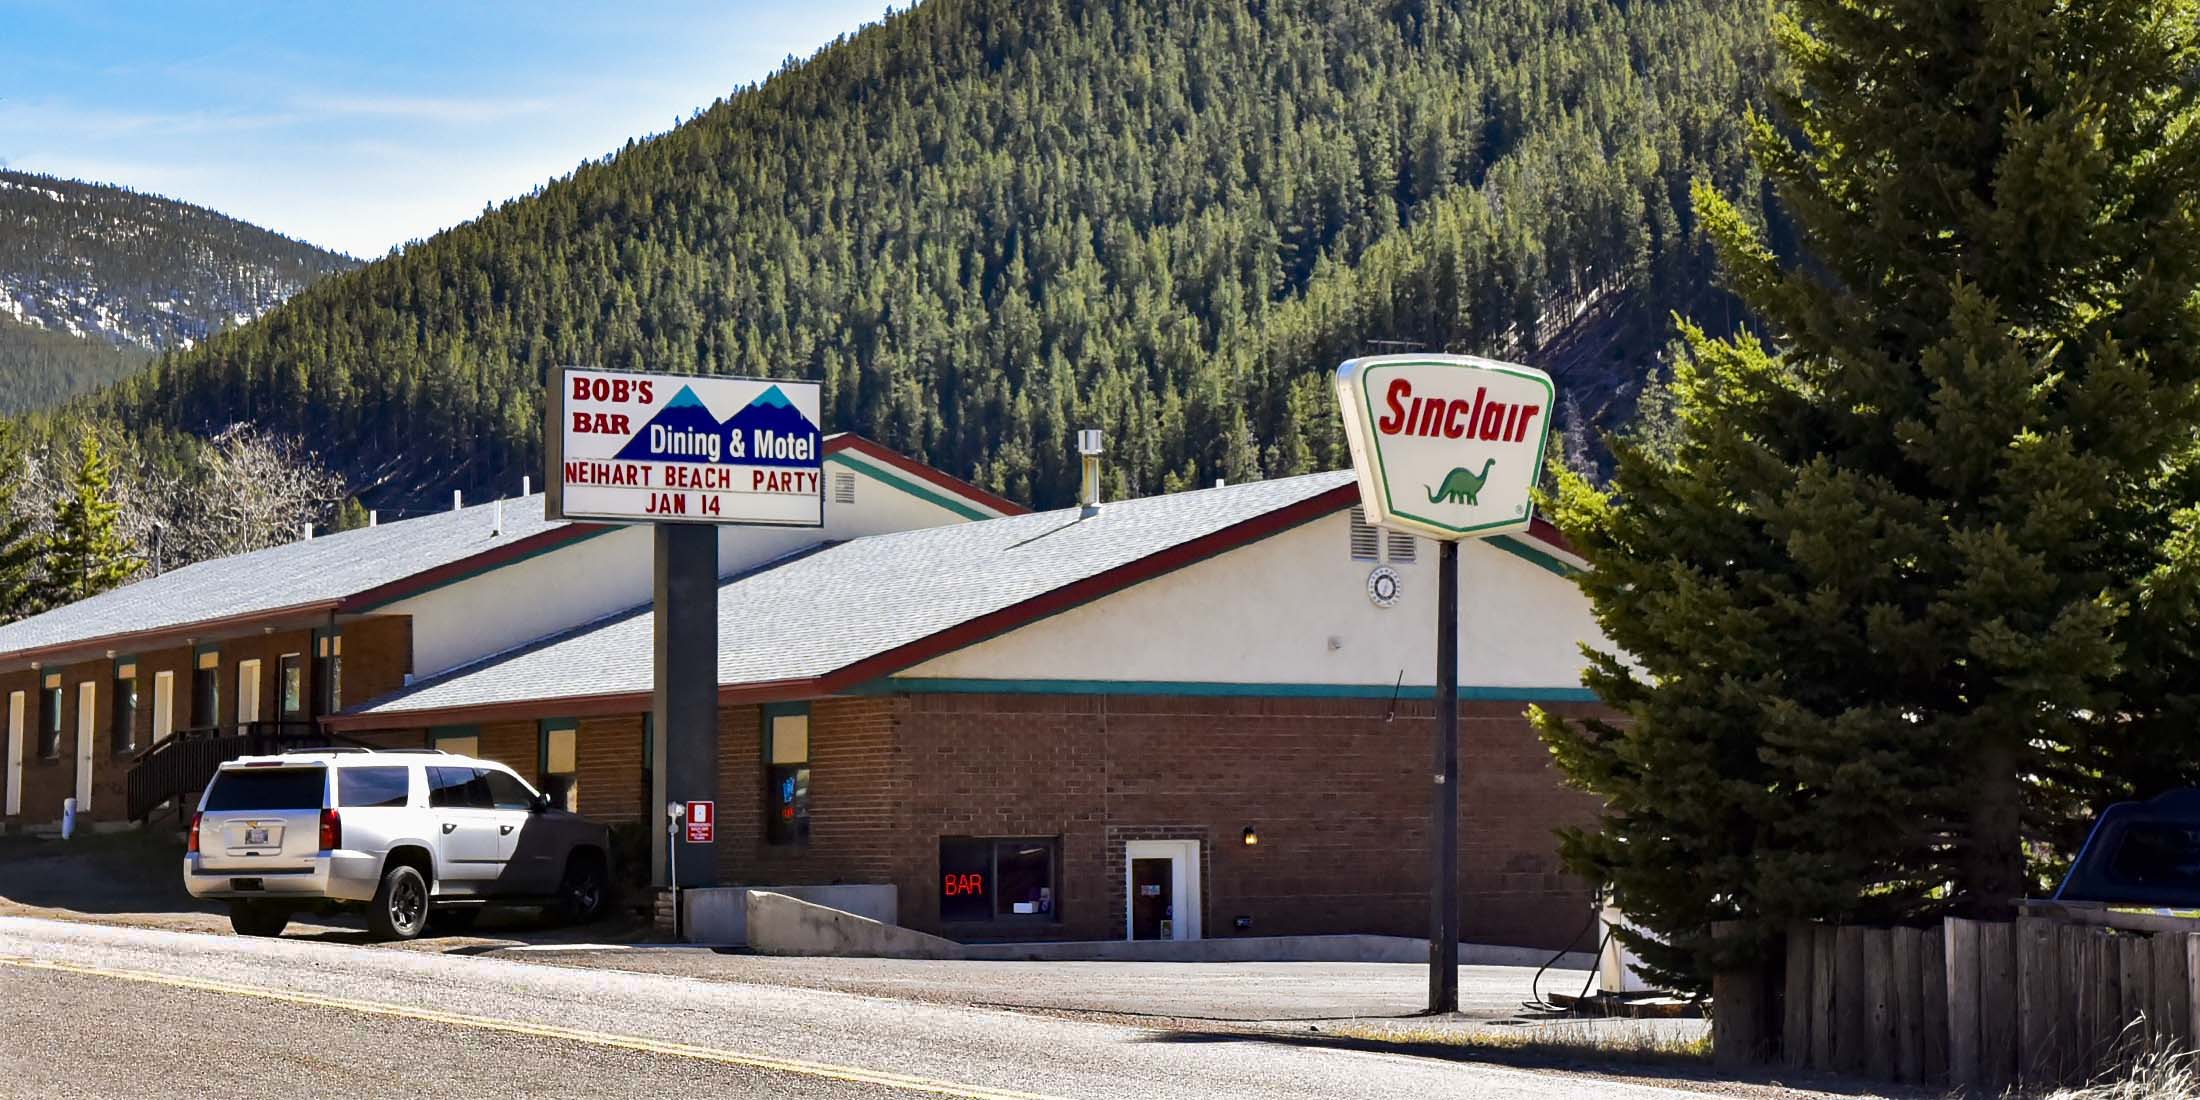 Fuel up at Bob's Bar Dining and Motel in Neihart, Montana  on Highway 89 in Cascade County.